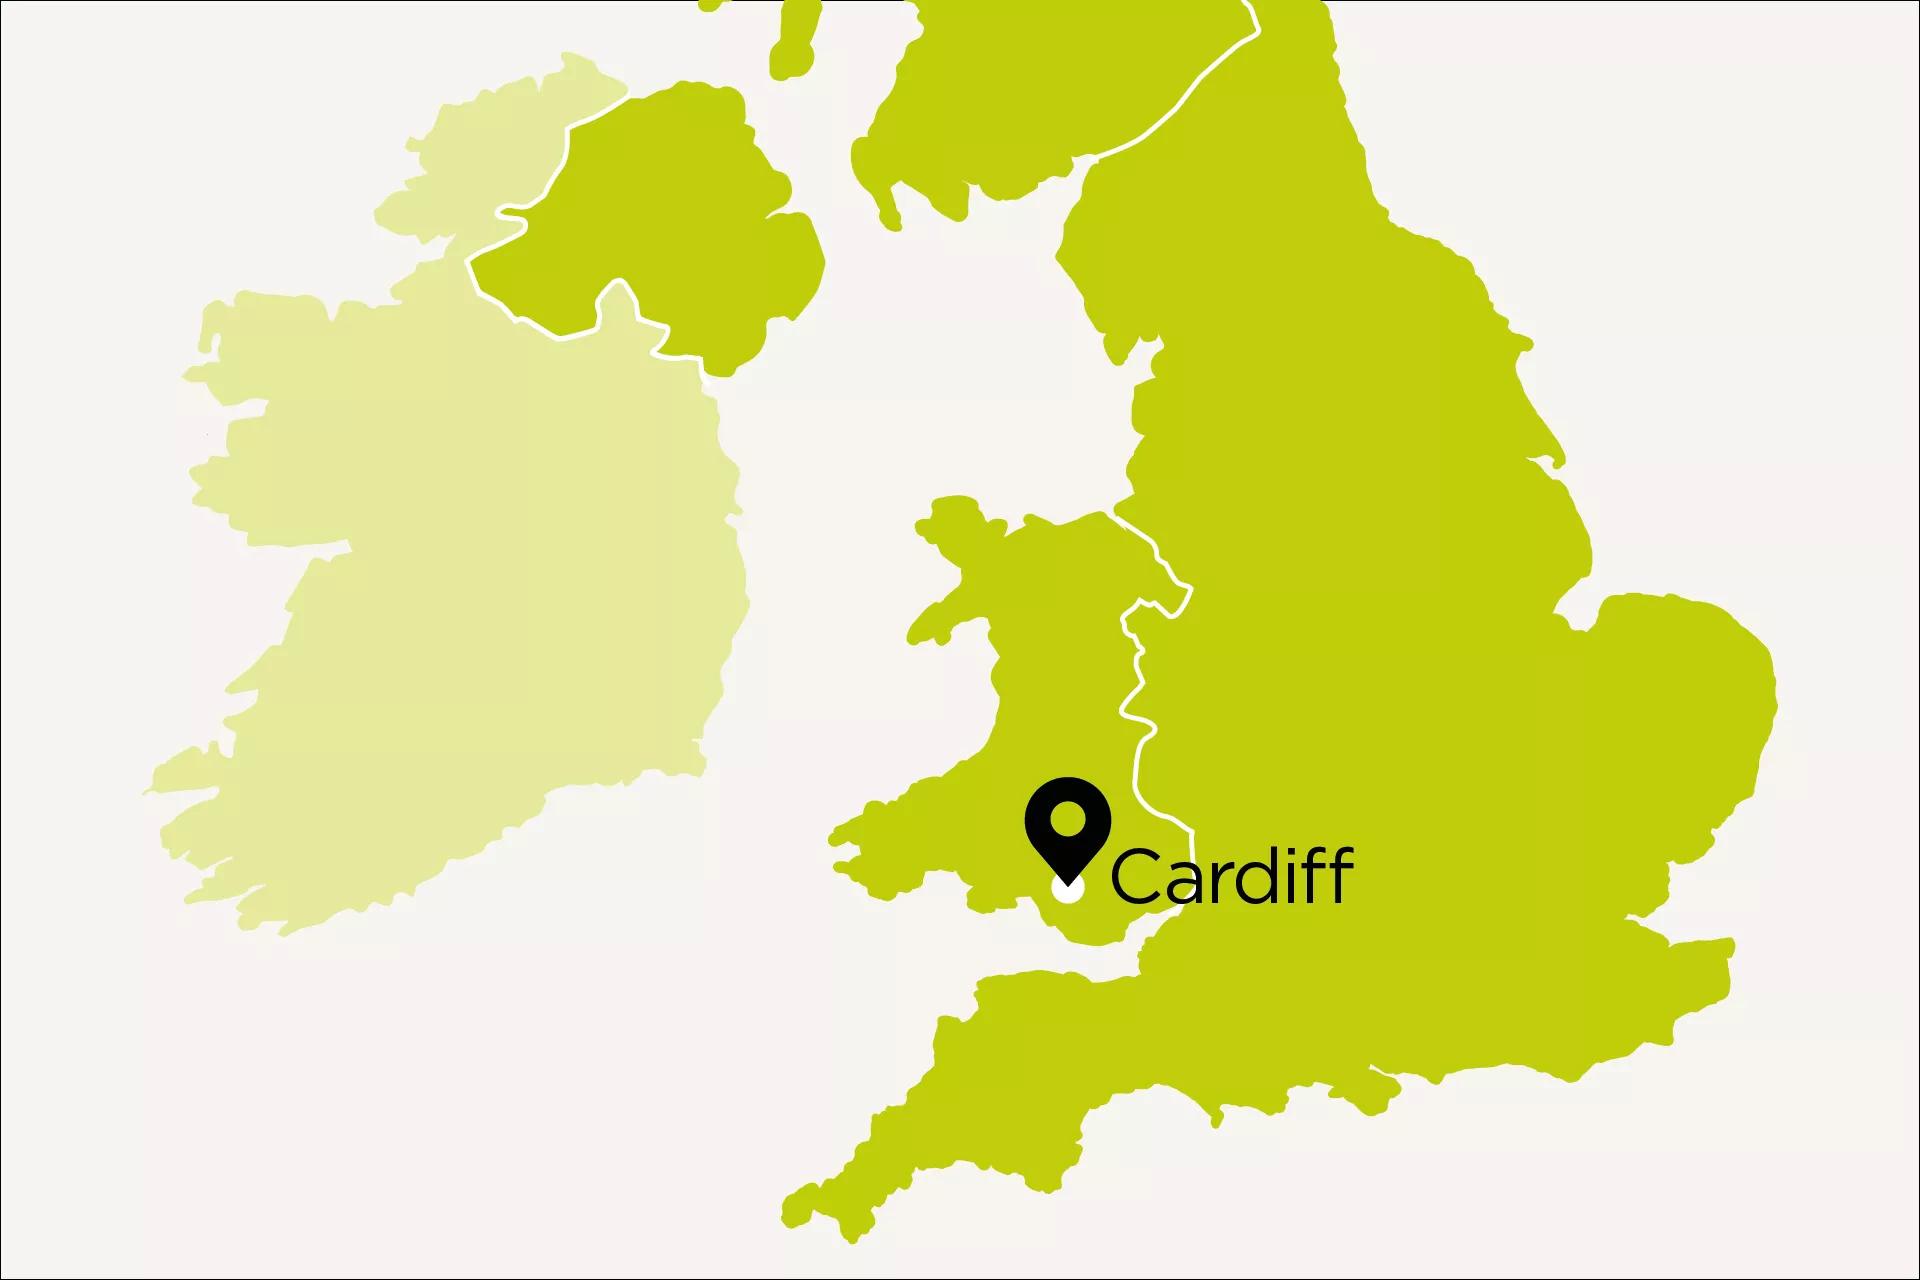 Map of UK with Cardiff pinpoint